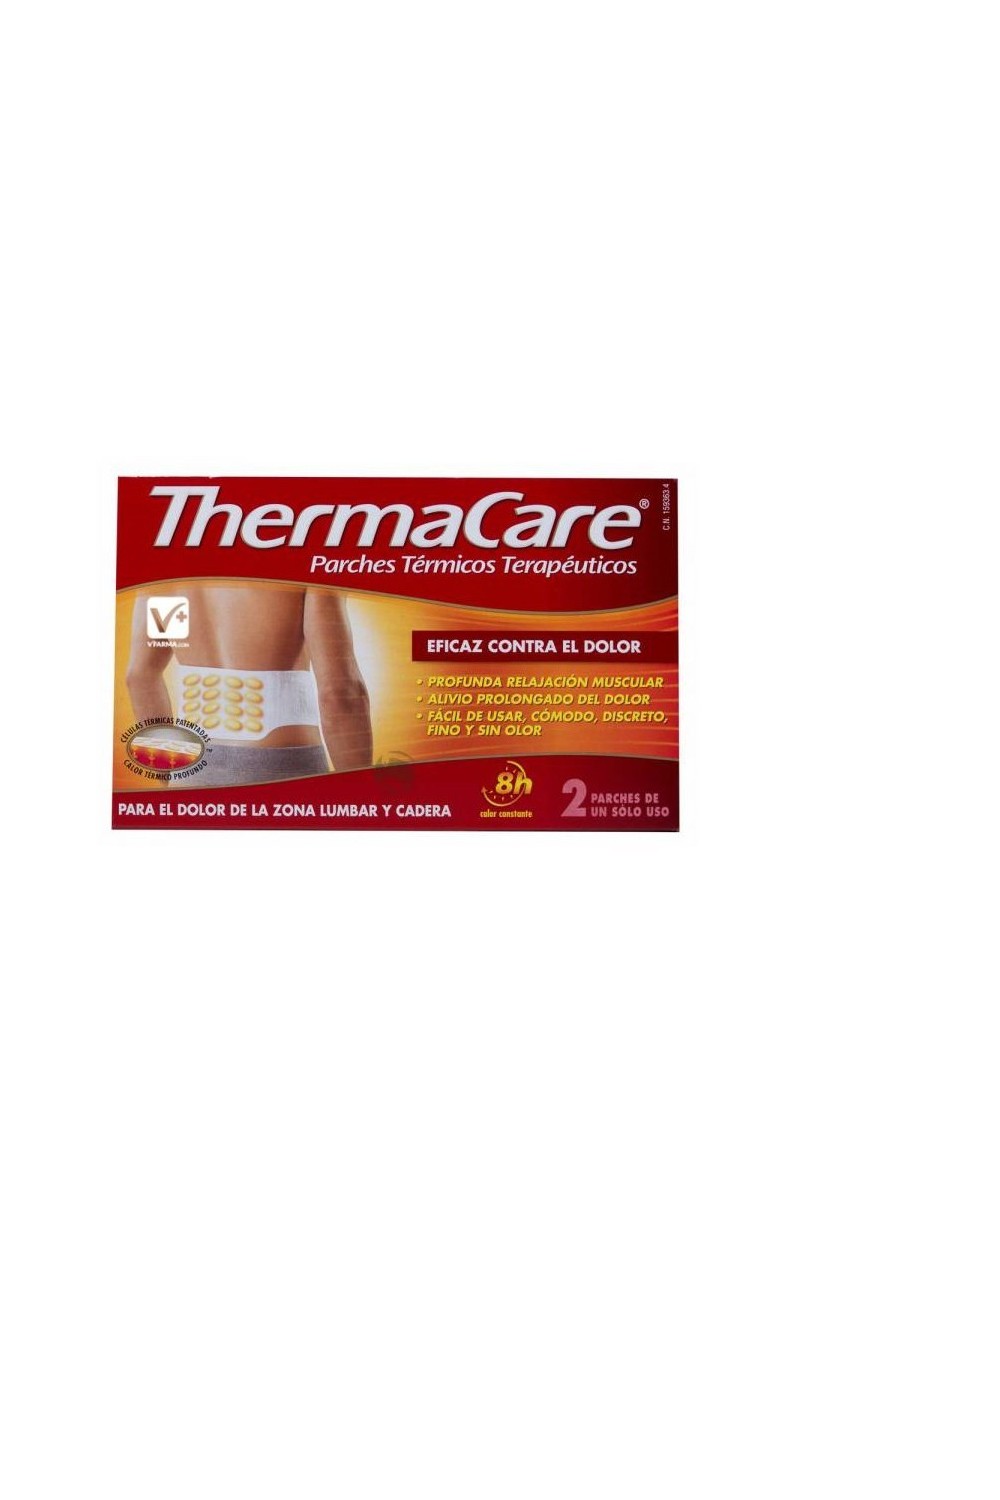 Thermacare Heatwraps Lower Back And Hip 2 Units